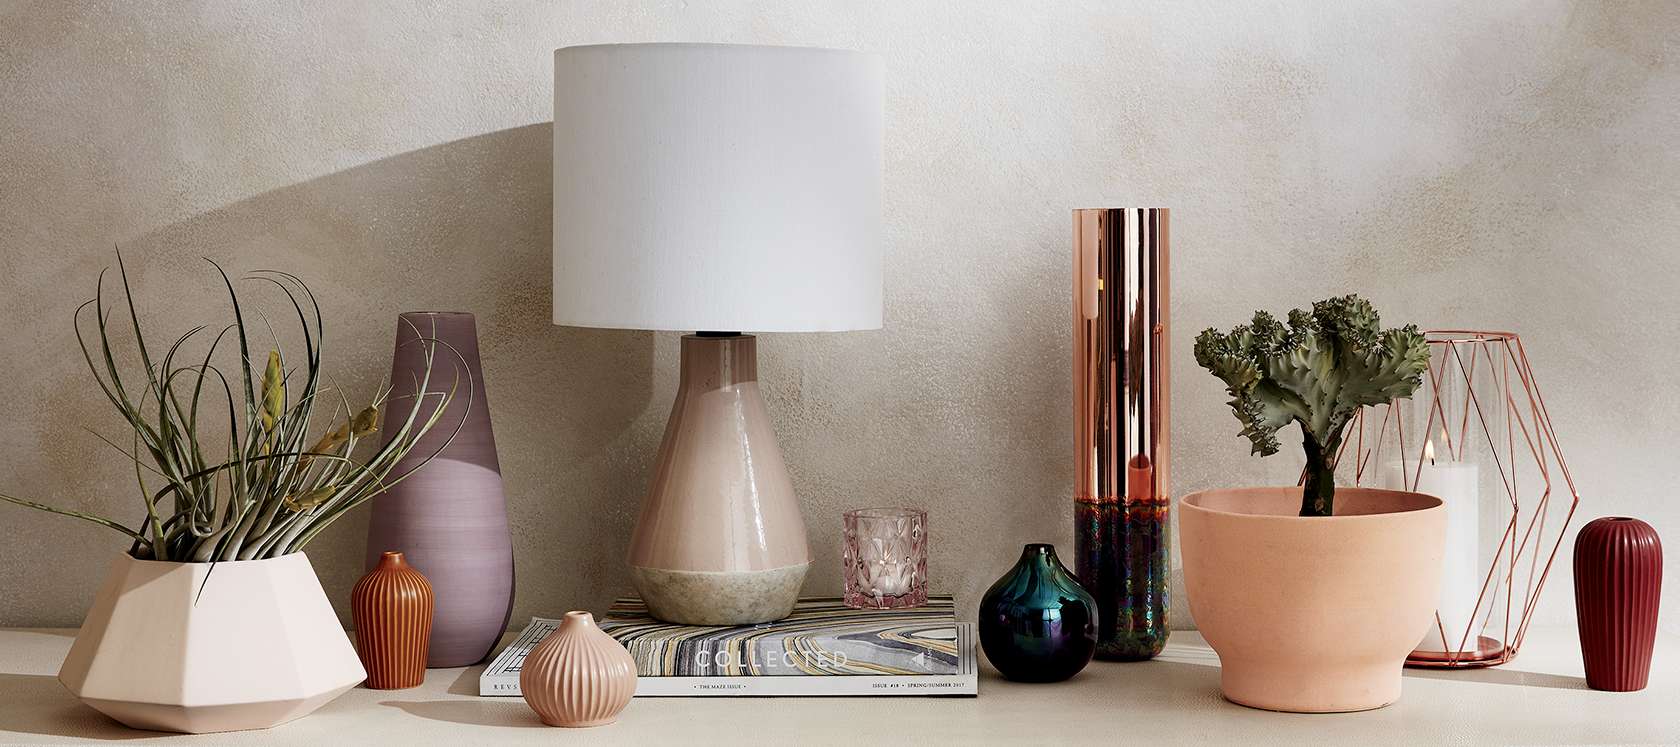 Modern, Affordable Home Decor - Modern Home Accessories | CB2